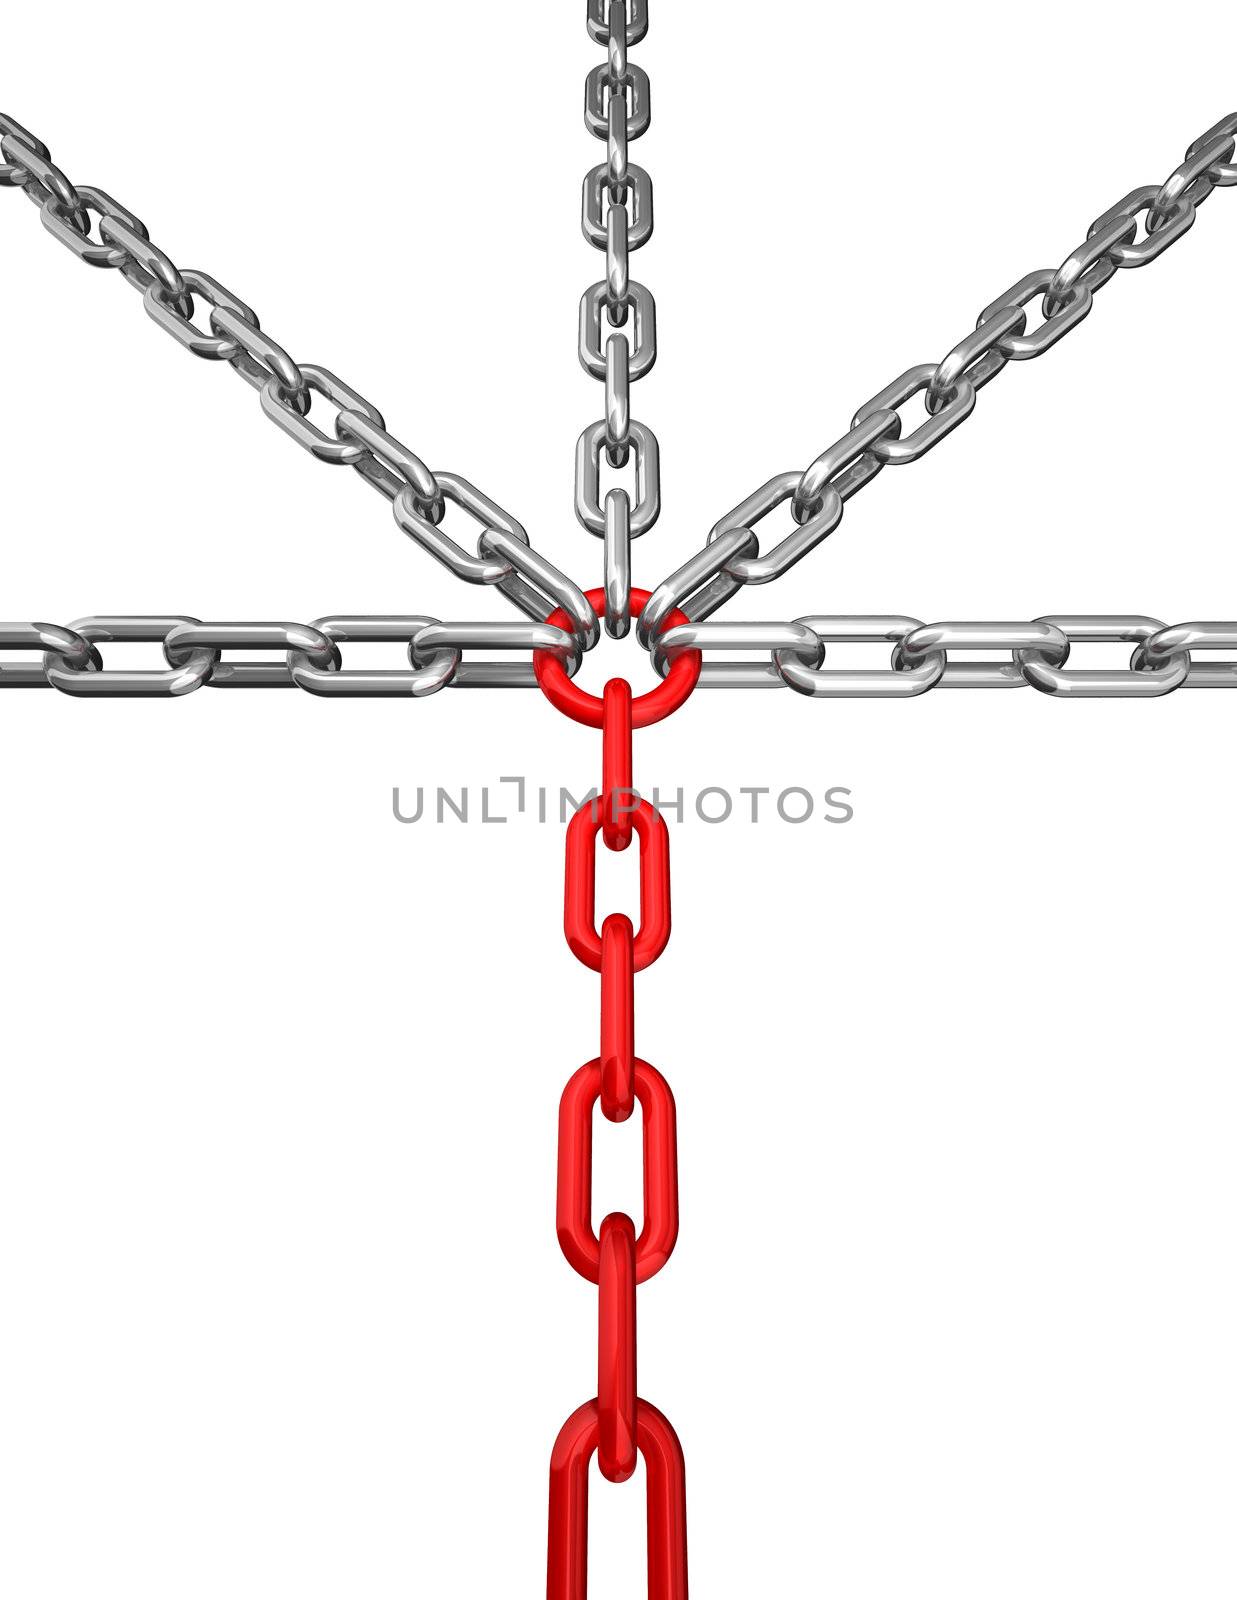 3d illustration of a silver and red chain - isolated on white - conceptual image